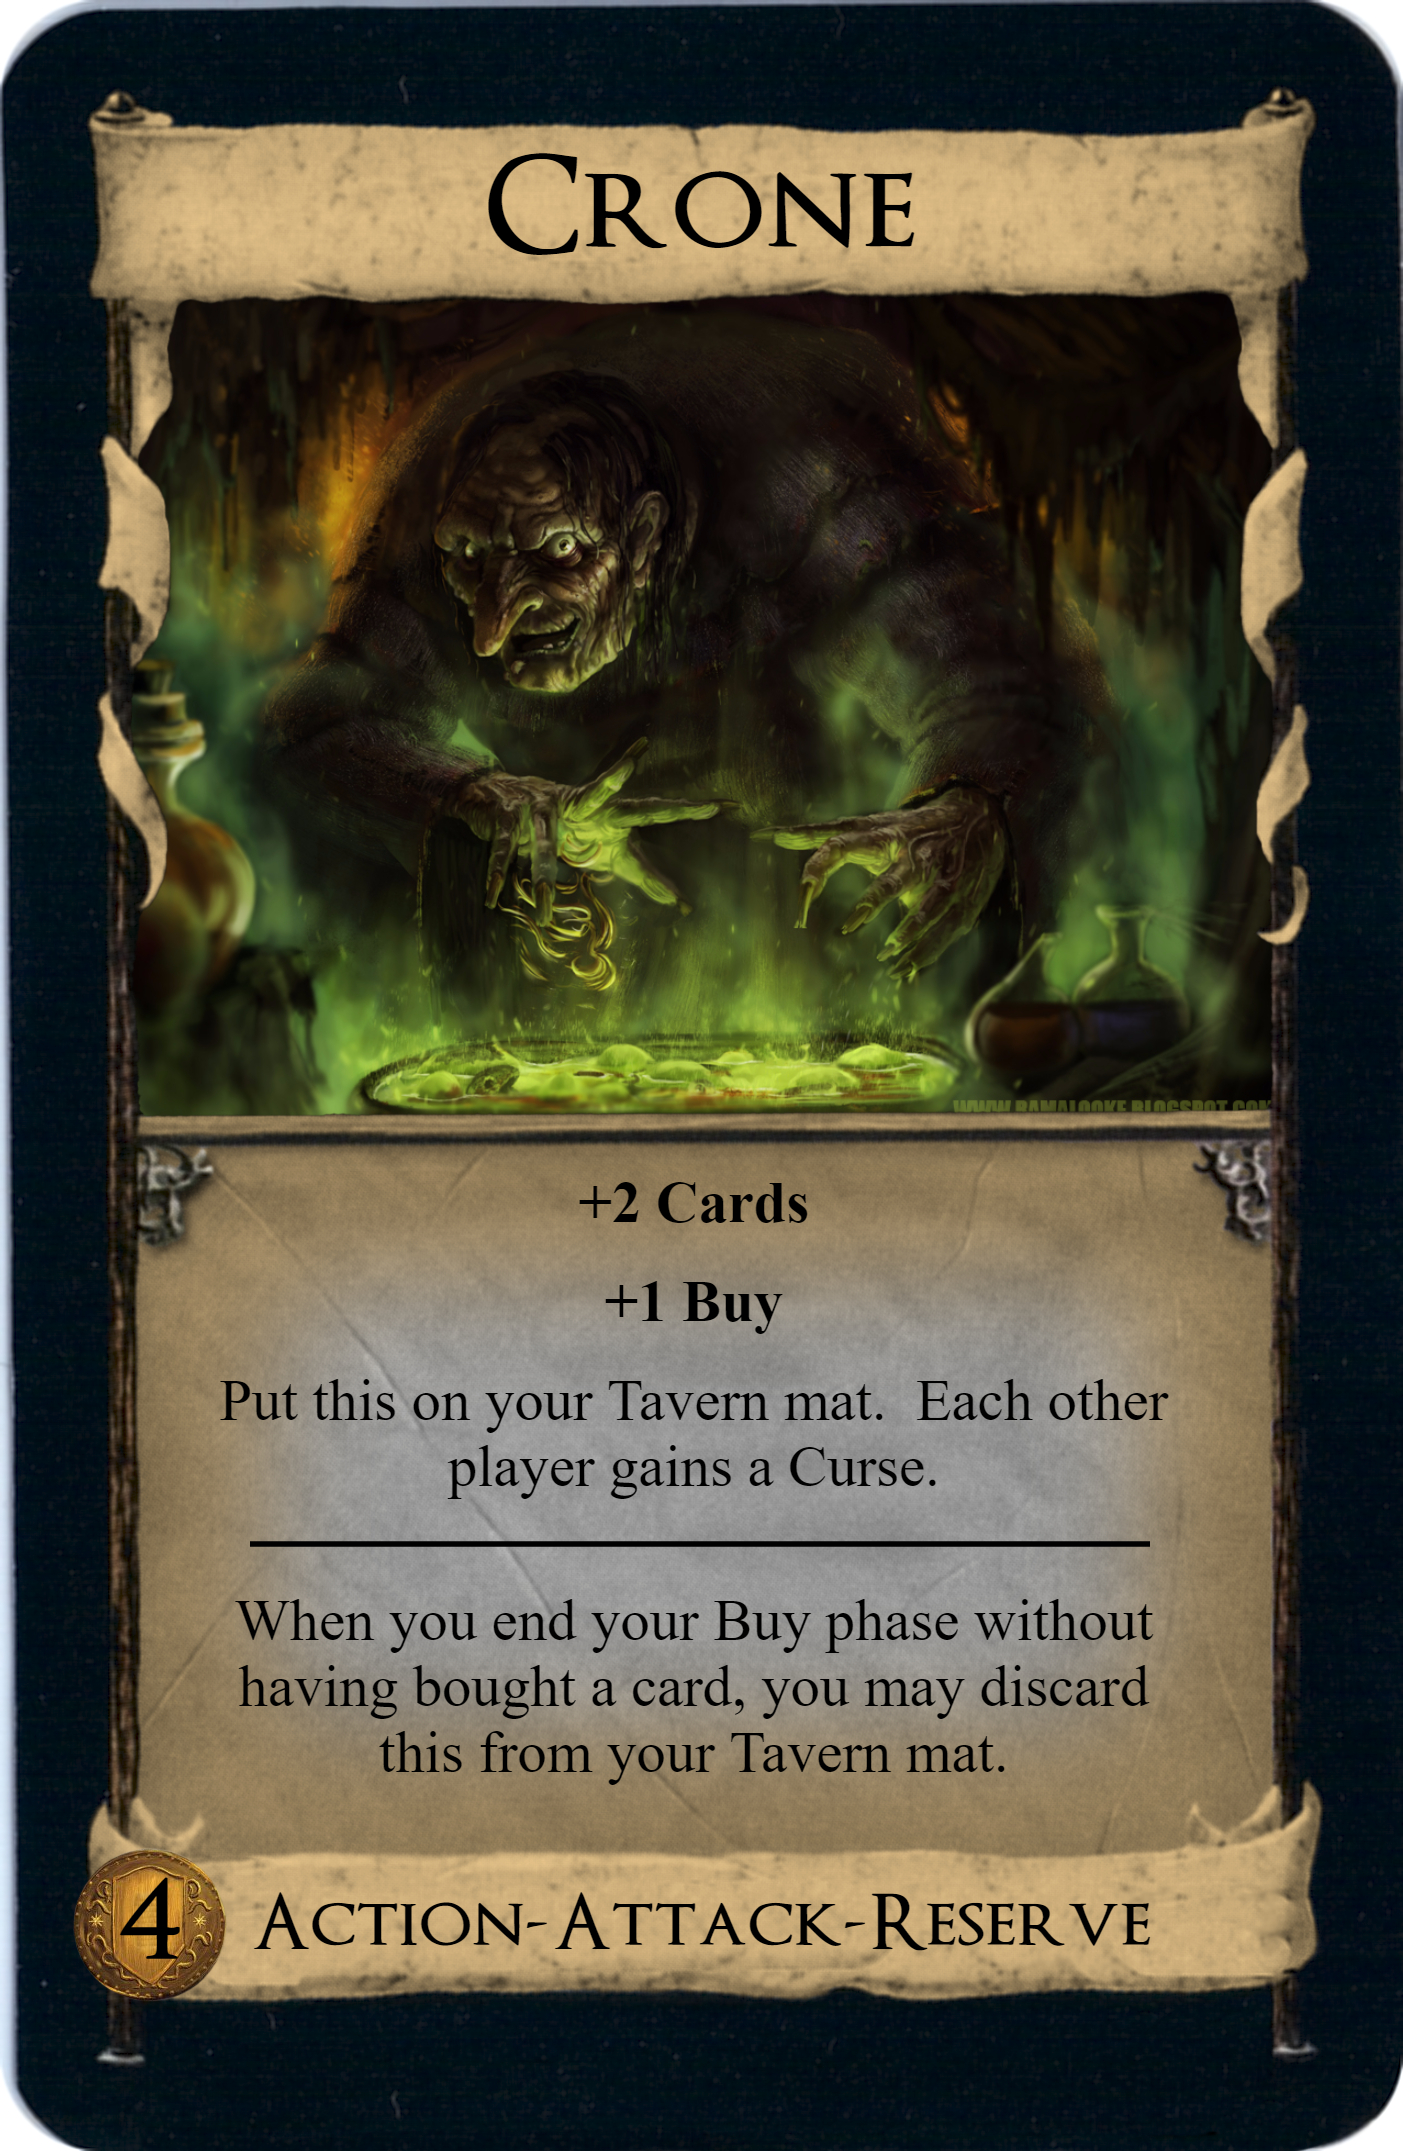 Dominion Card Image Generator with Dominion Card Template